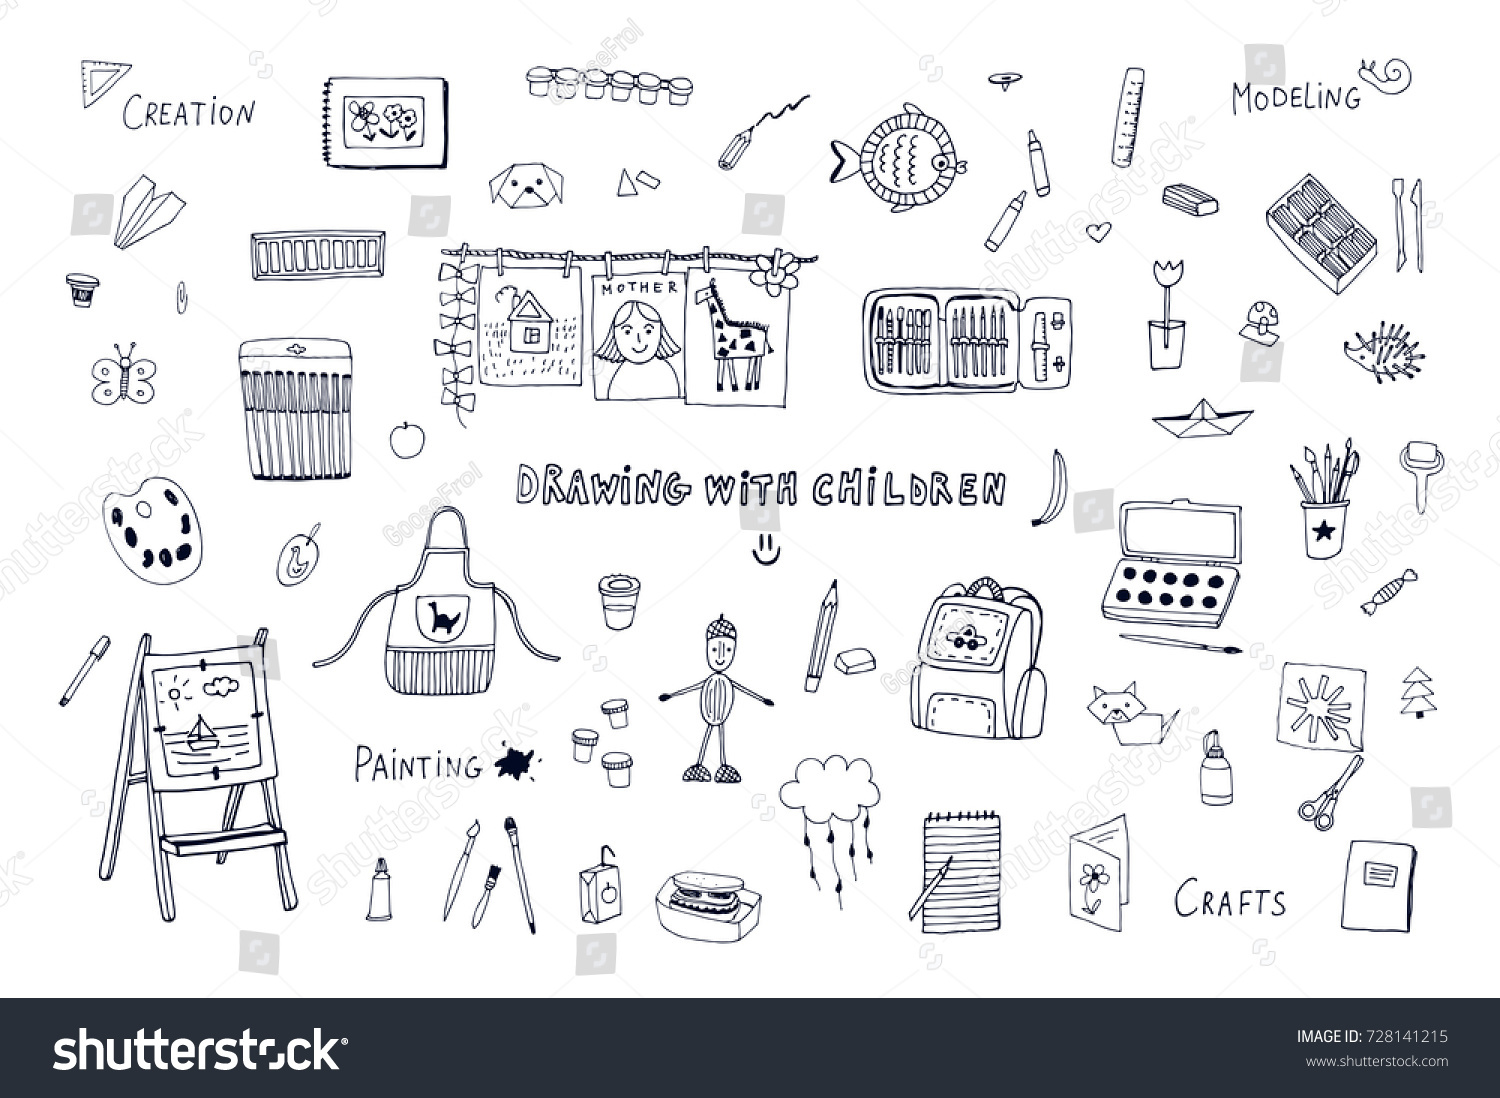 Drawing Children Lesson School Objects Doodle Stock Illustration